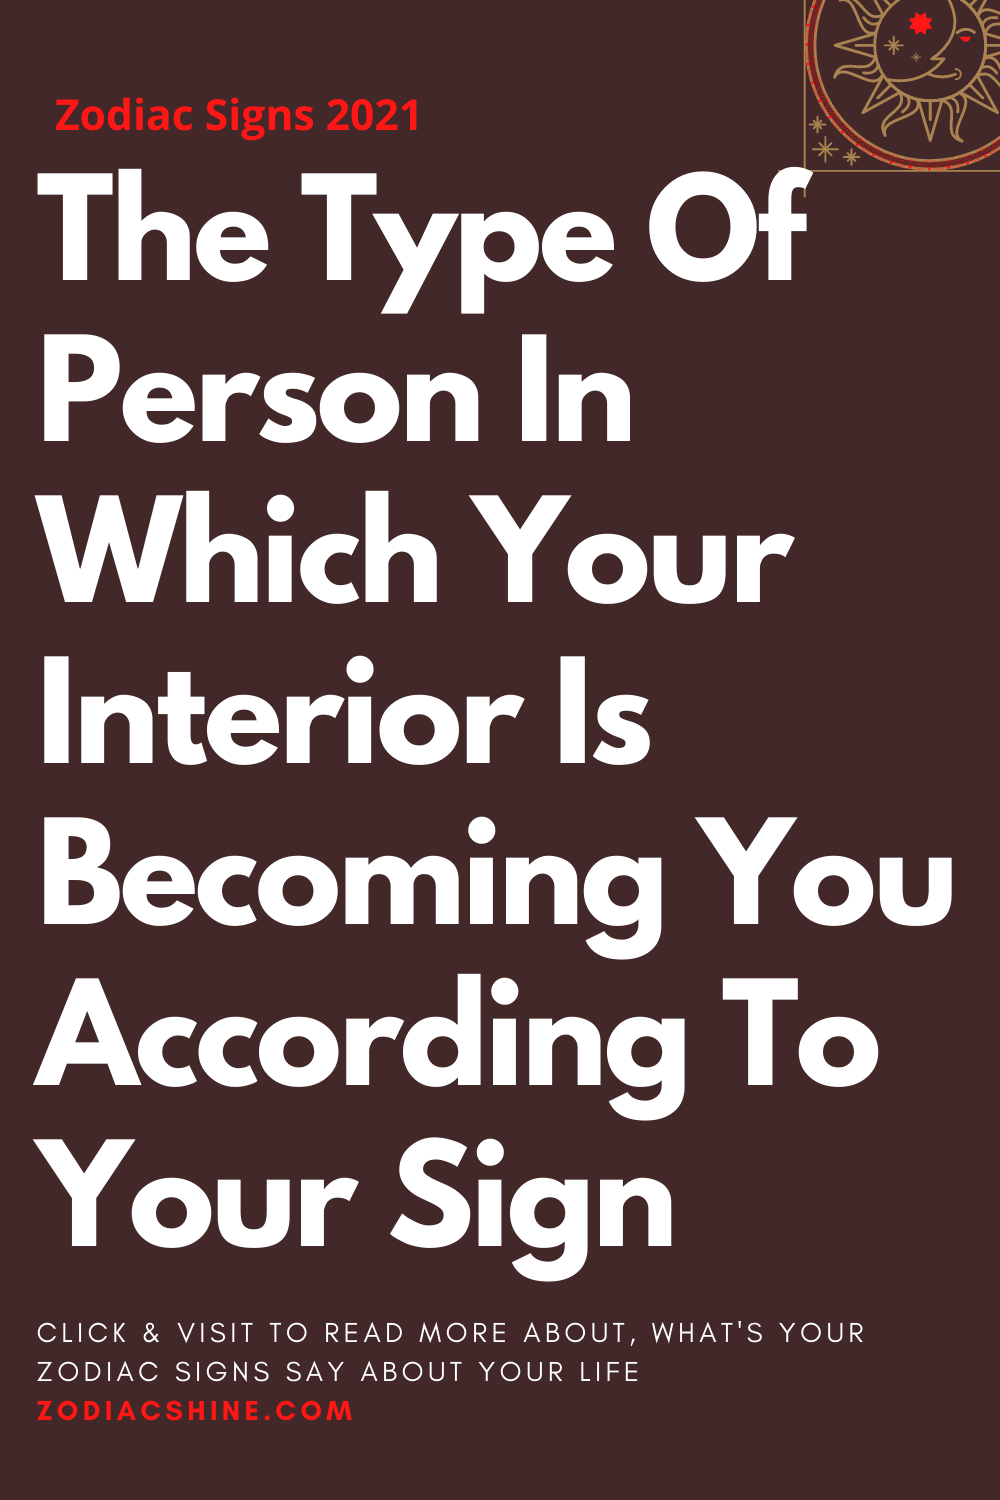 The Type Of Person In Which Your Interior Is Becoming You According To Your Sign